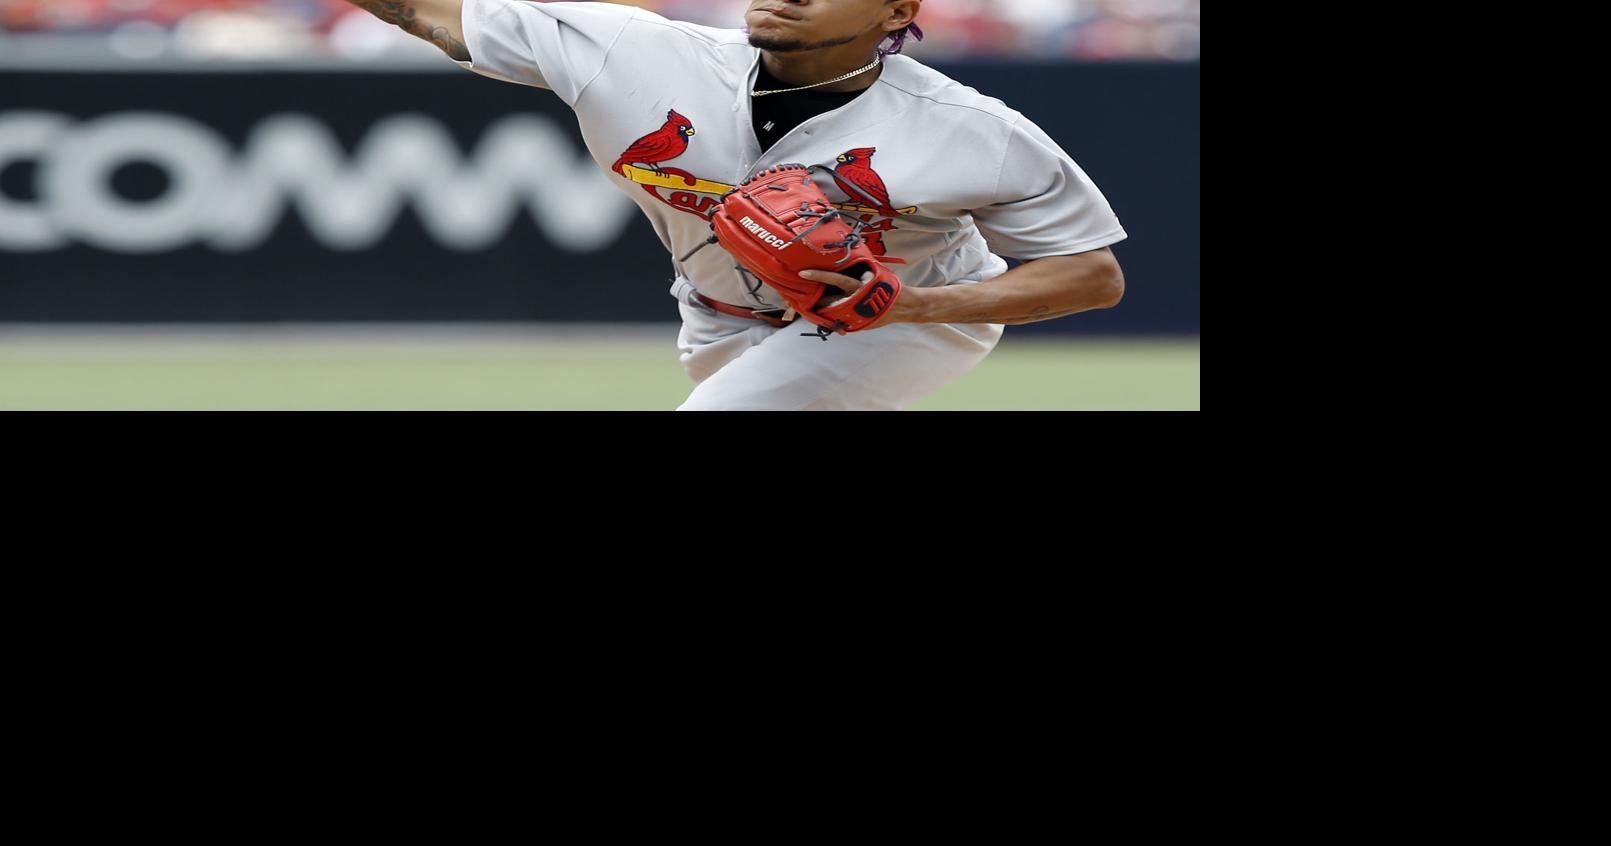 Bernie: Running Out Of Starting Pitching, The Cardinals Turn To